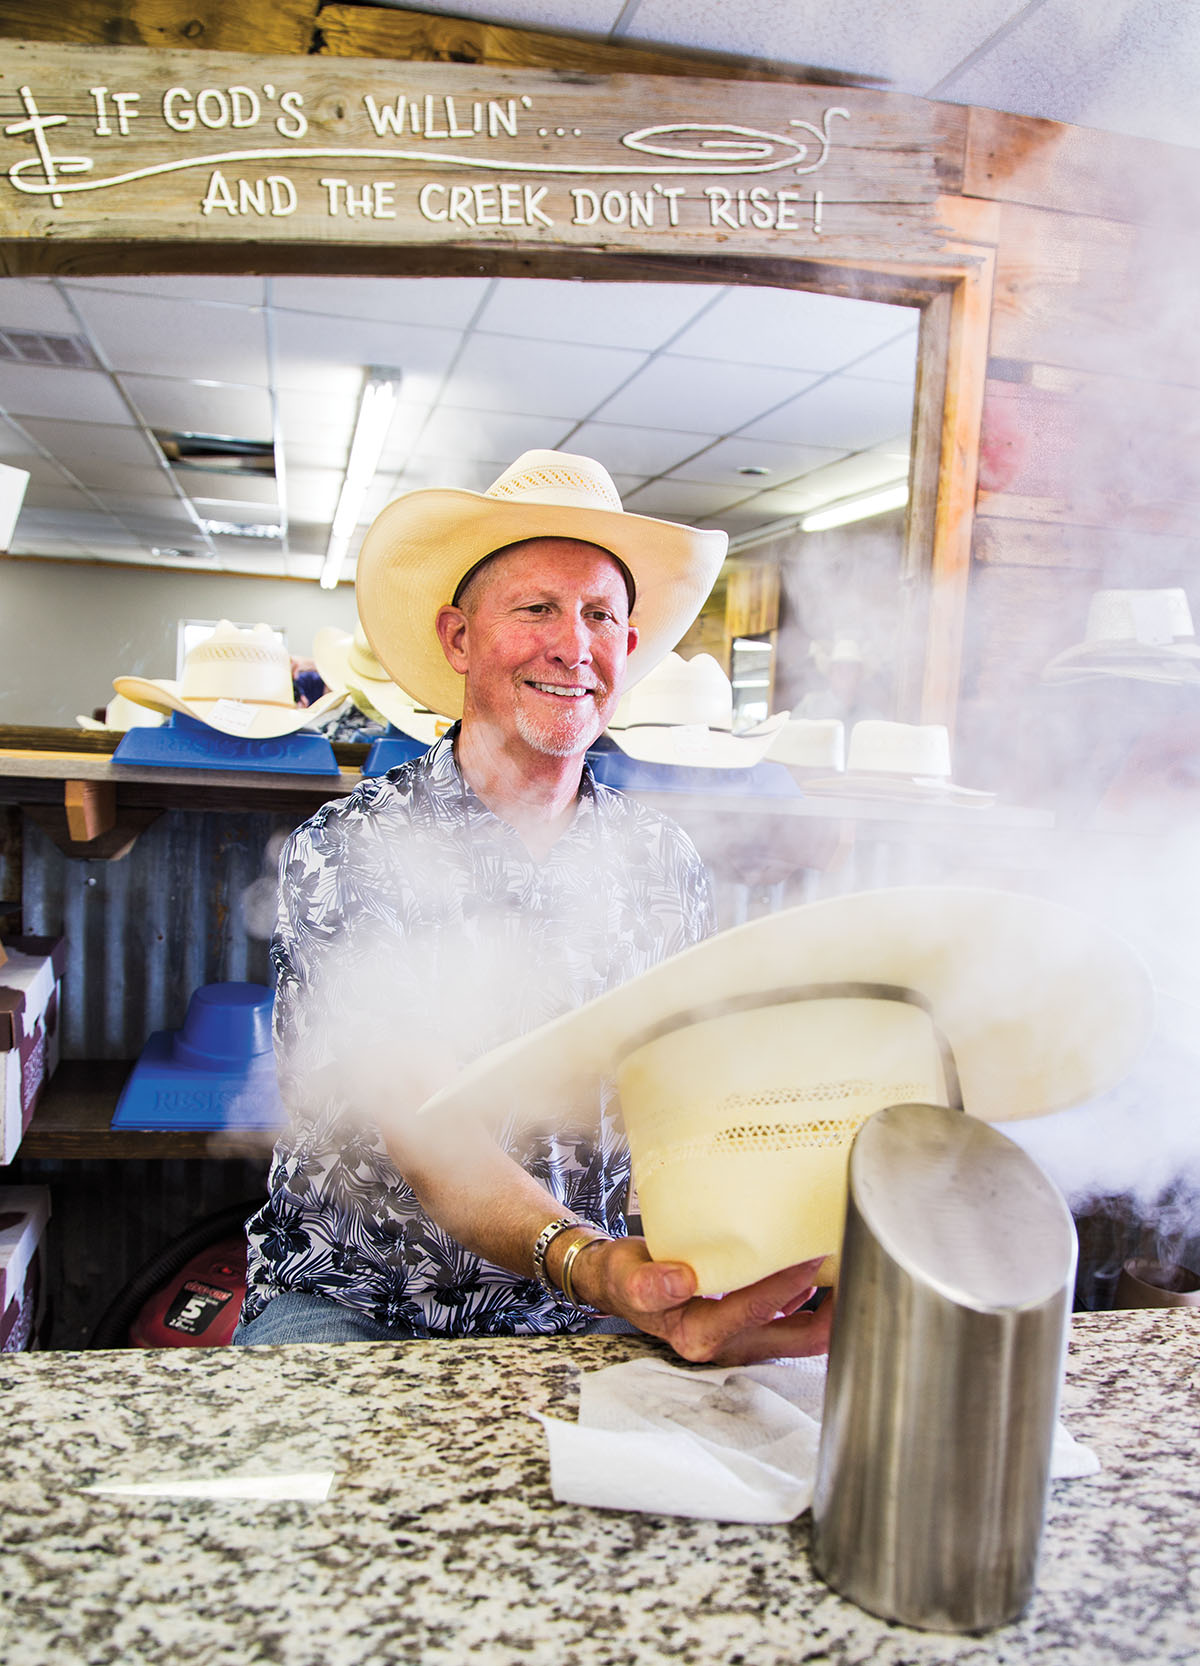 A man in a cowboy hat steams a tan hat on a silver table